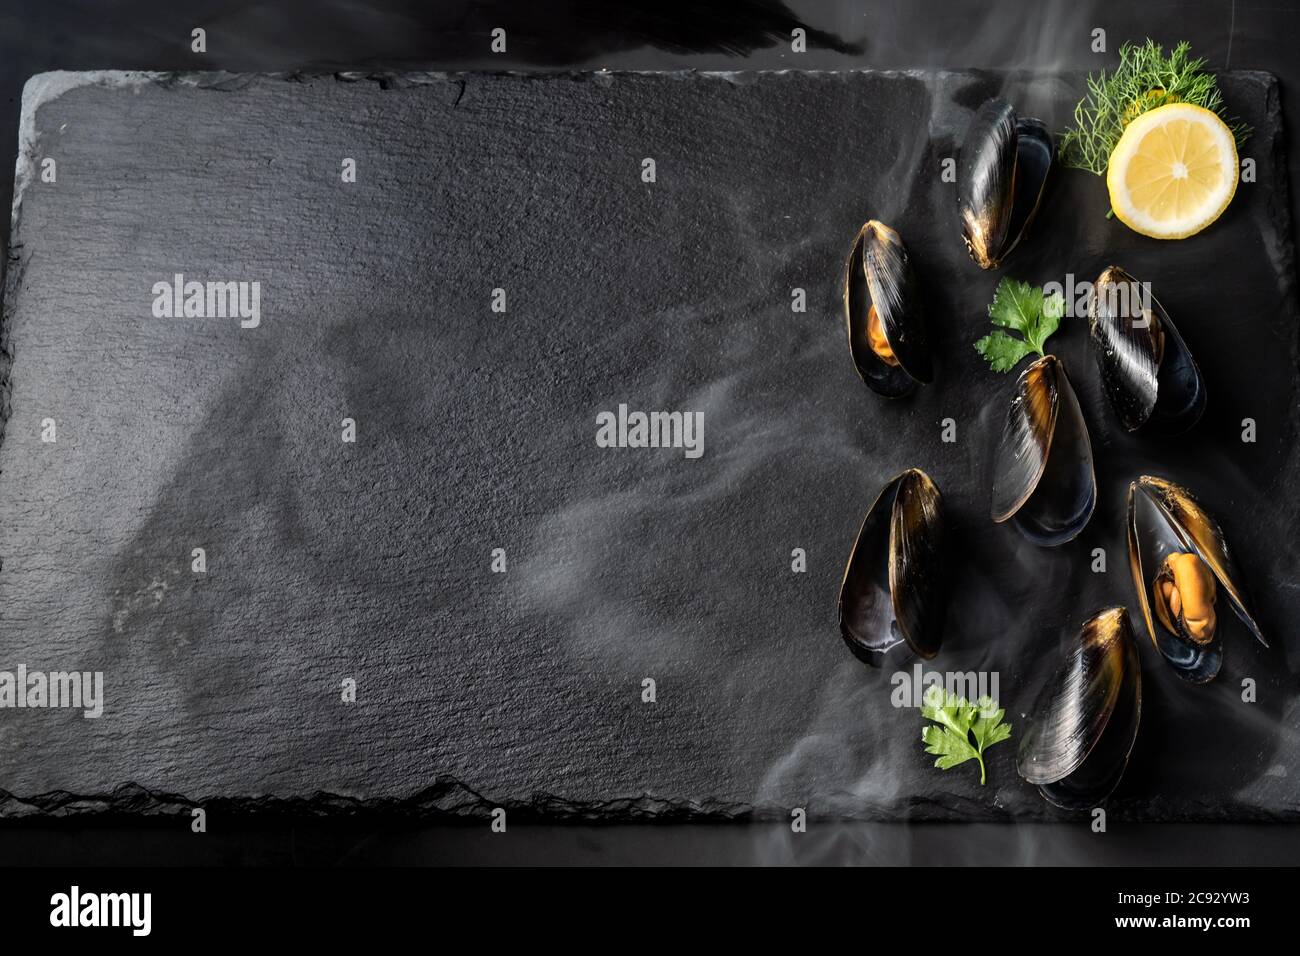 Black mussel with lemon serve on black stone plate. Fresh seafood food and european cuisine gourmet concept. Stock Photo